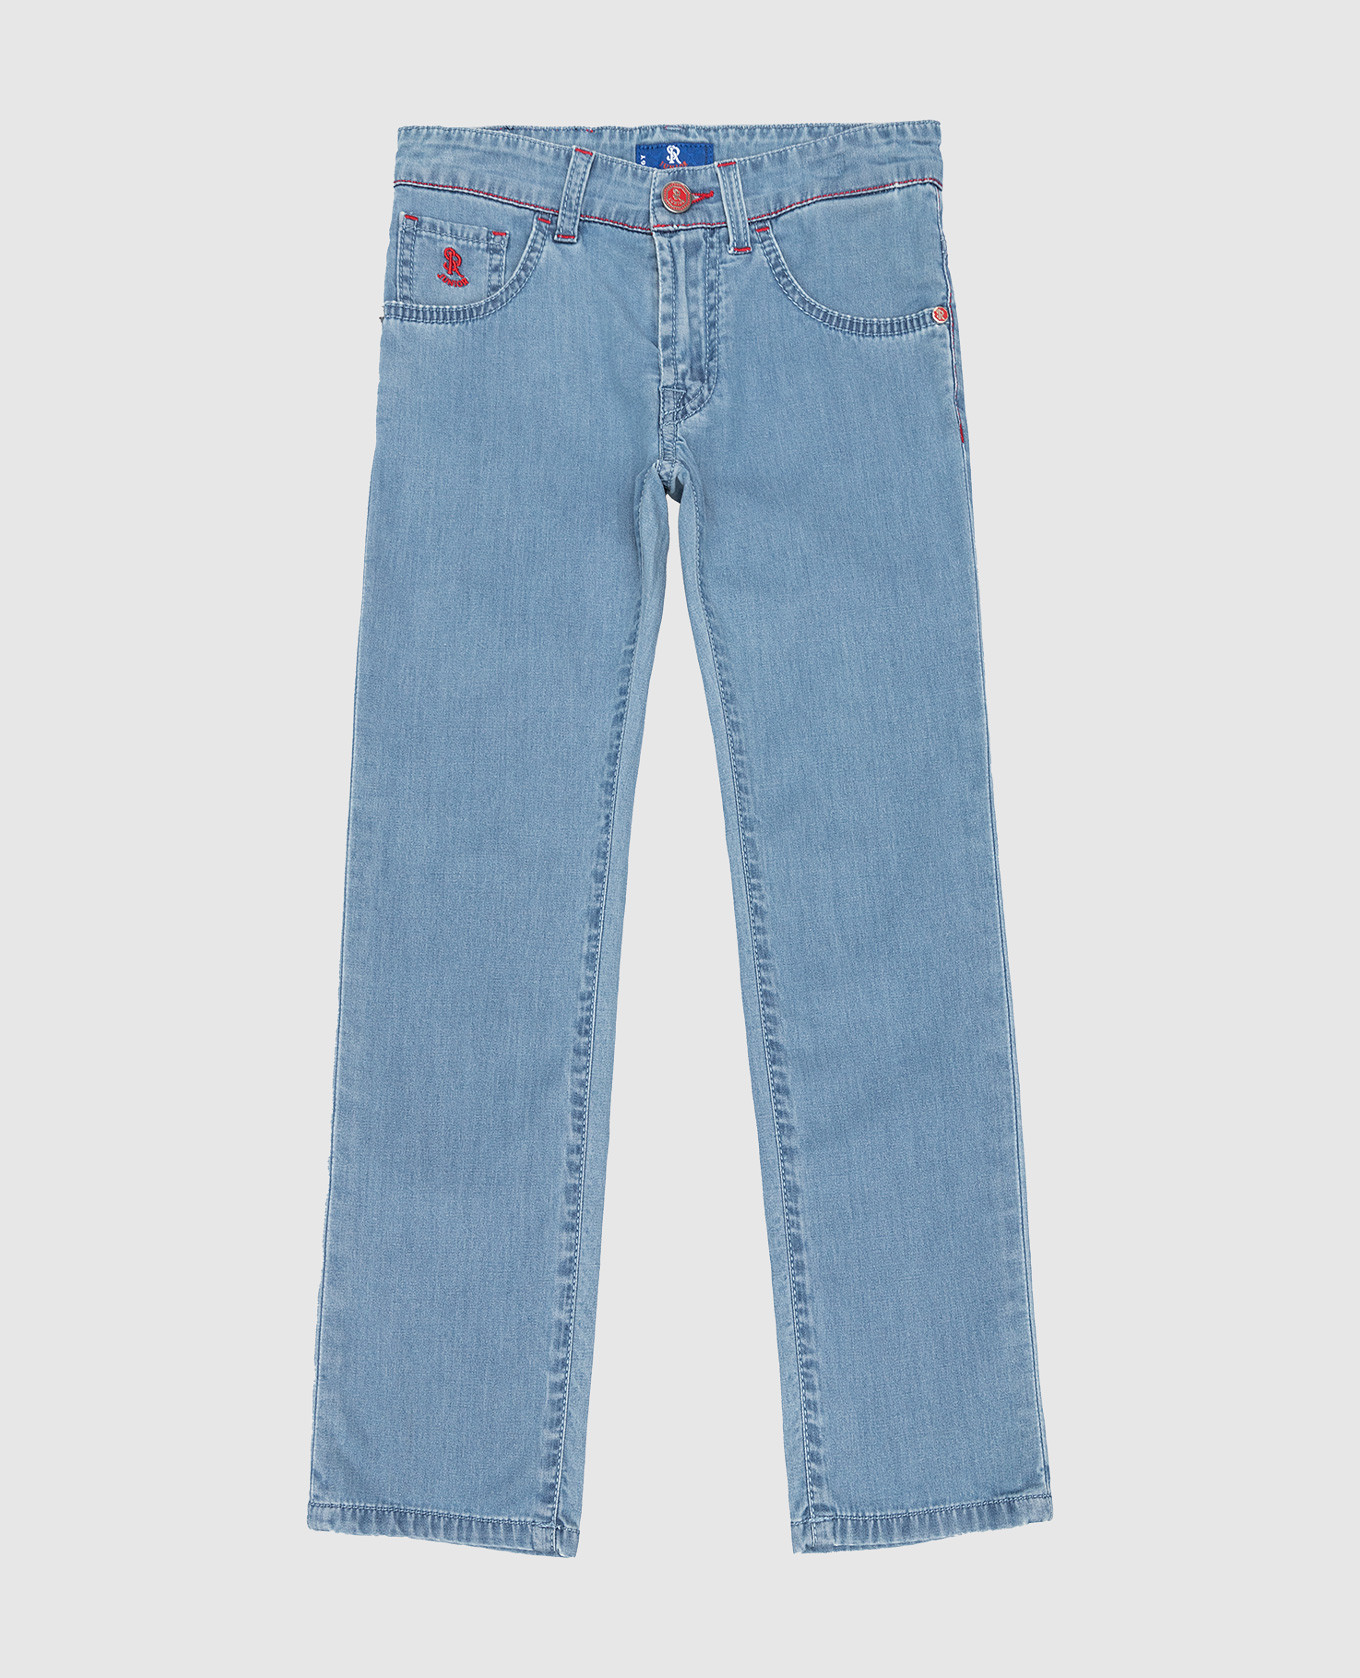 Children's blue jeans with logo